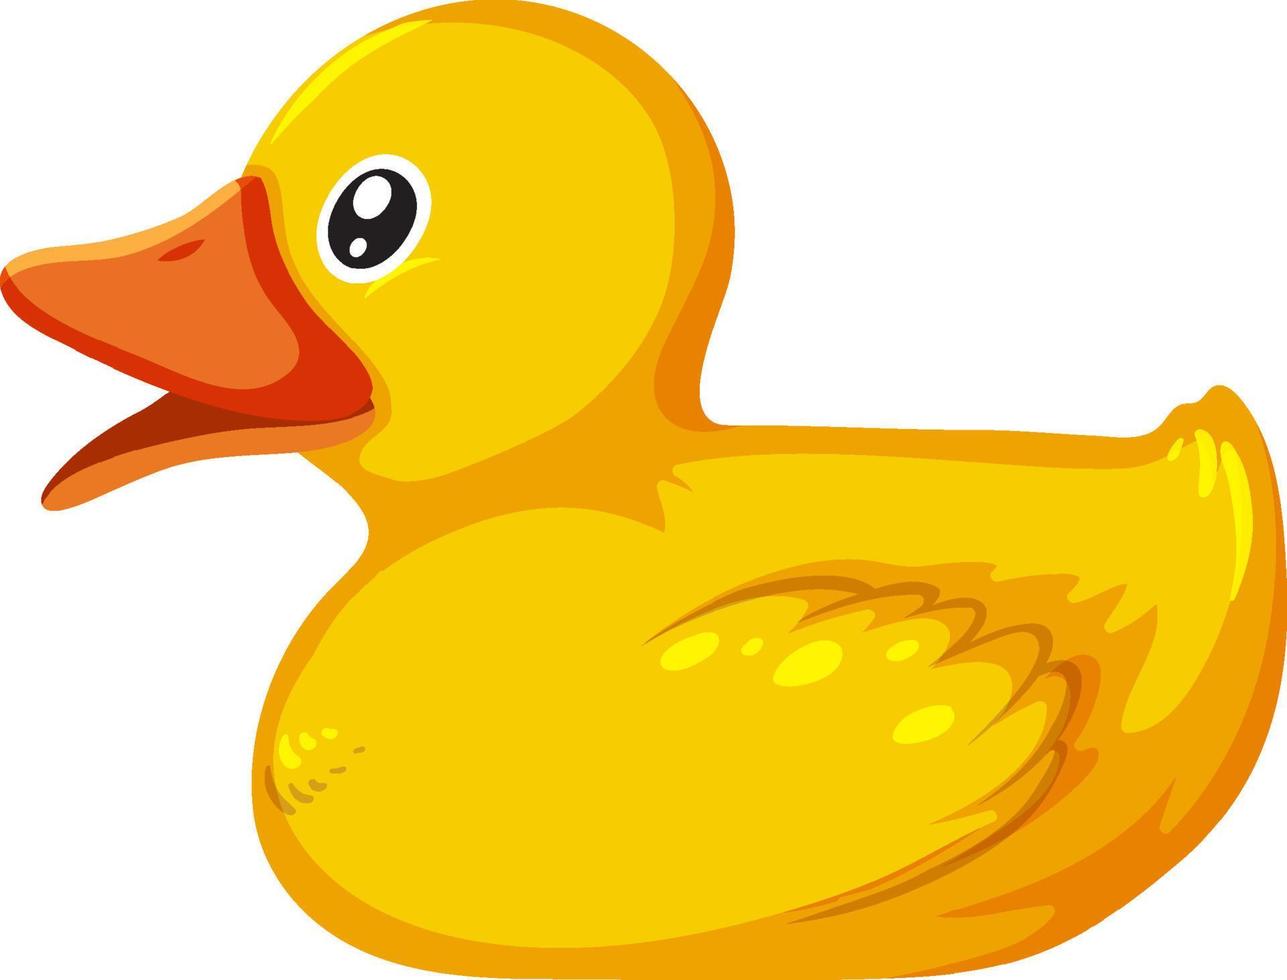 A yellow toy duck on white background vector